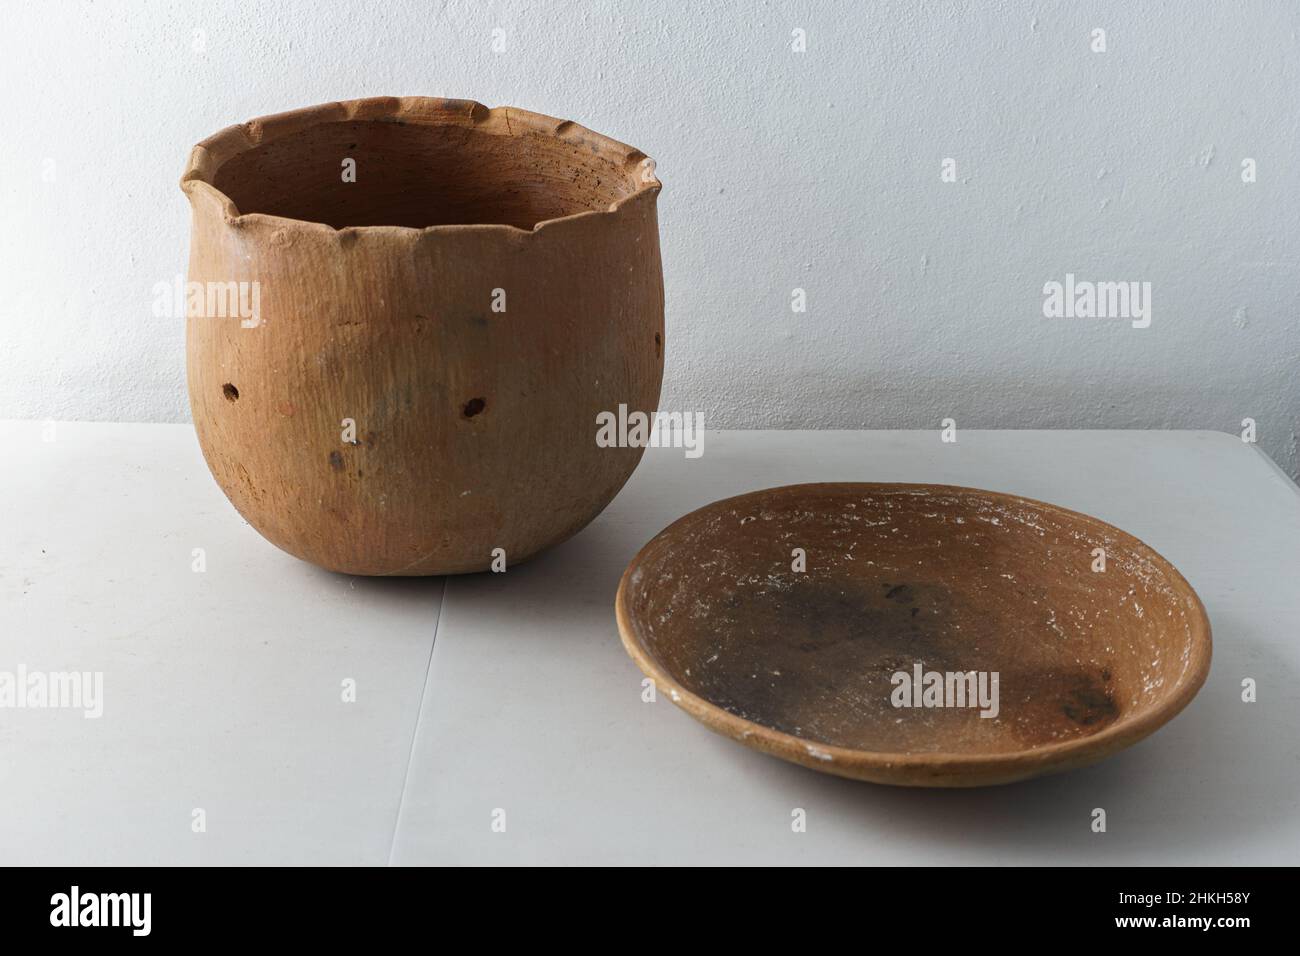 https://c8.alamy.com/comp/2HKH58Y/nicaraguan-terracotta-ware-called-barro-sit-on-a-white-table-these-are-a-comal-for-cooking-tortillas-and-roasting-seeds-and-a-garden-pot-2HKH58Y.jpg